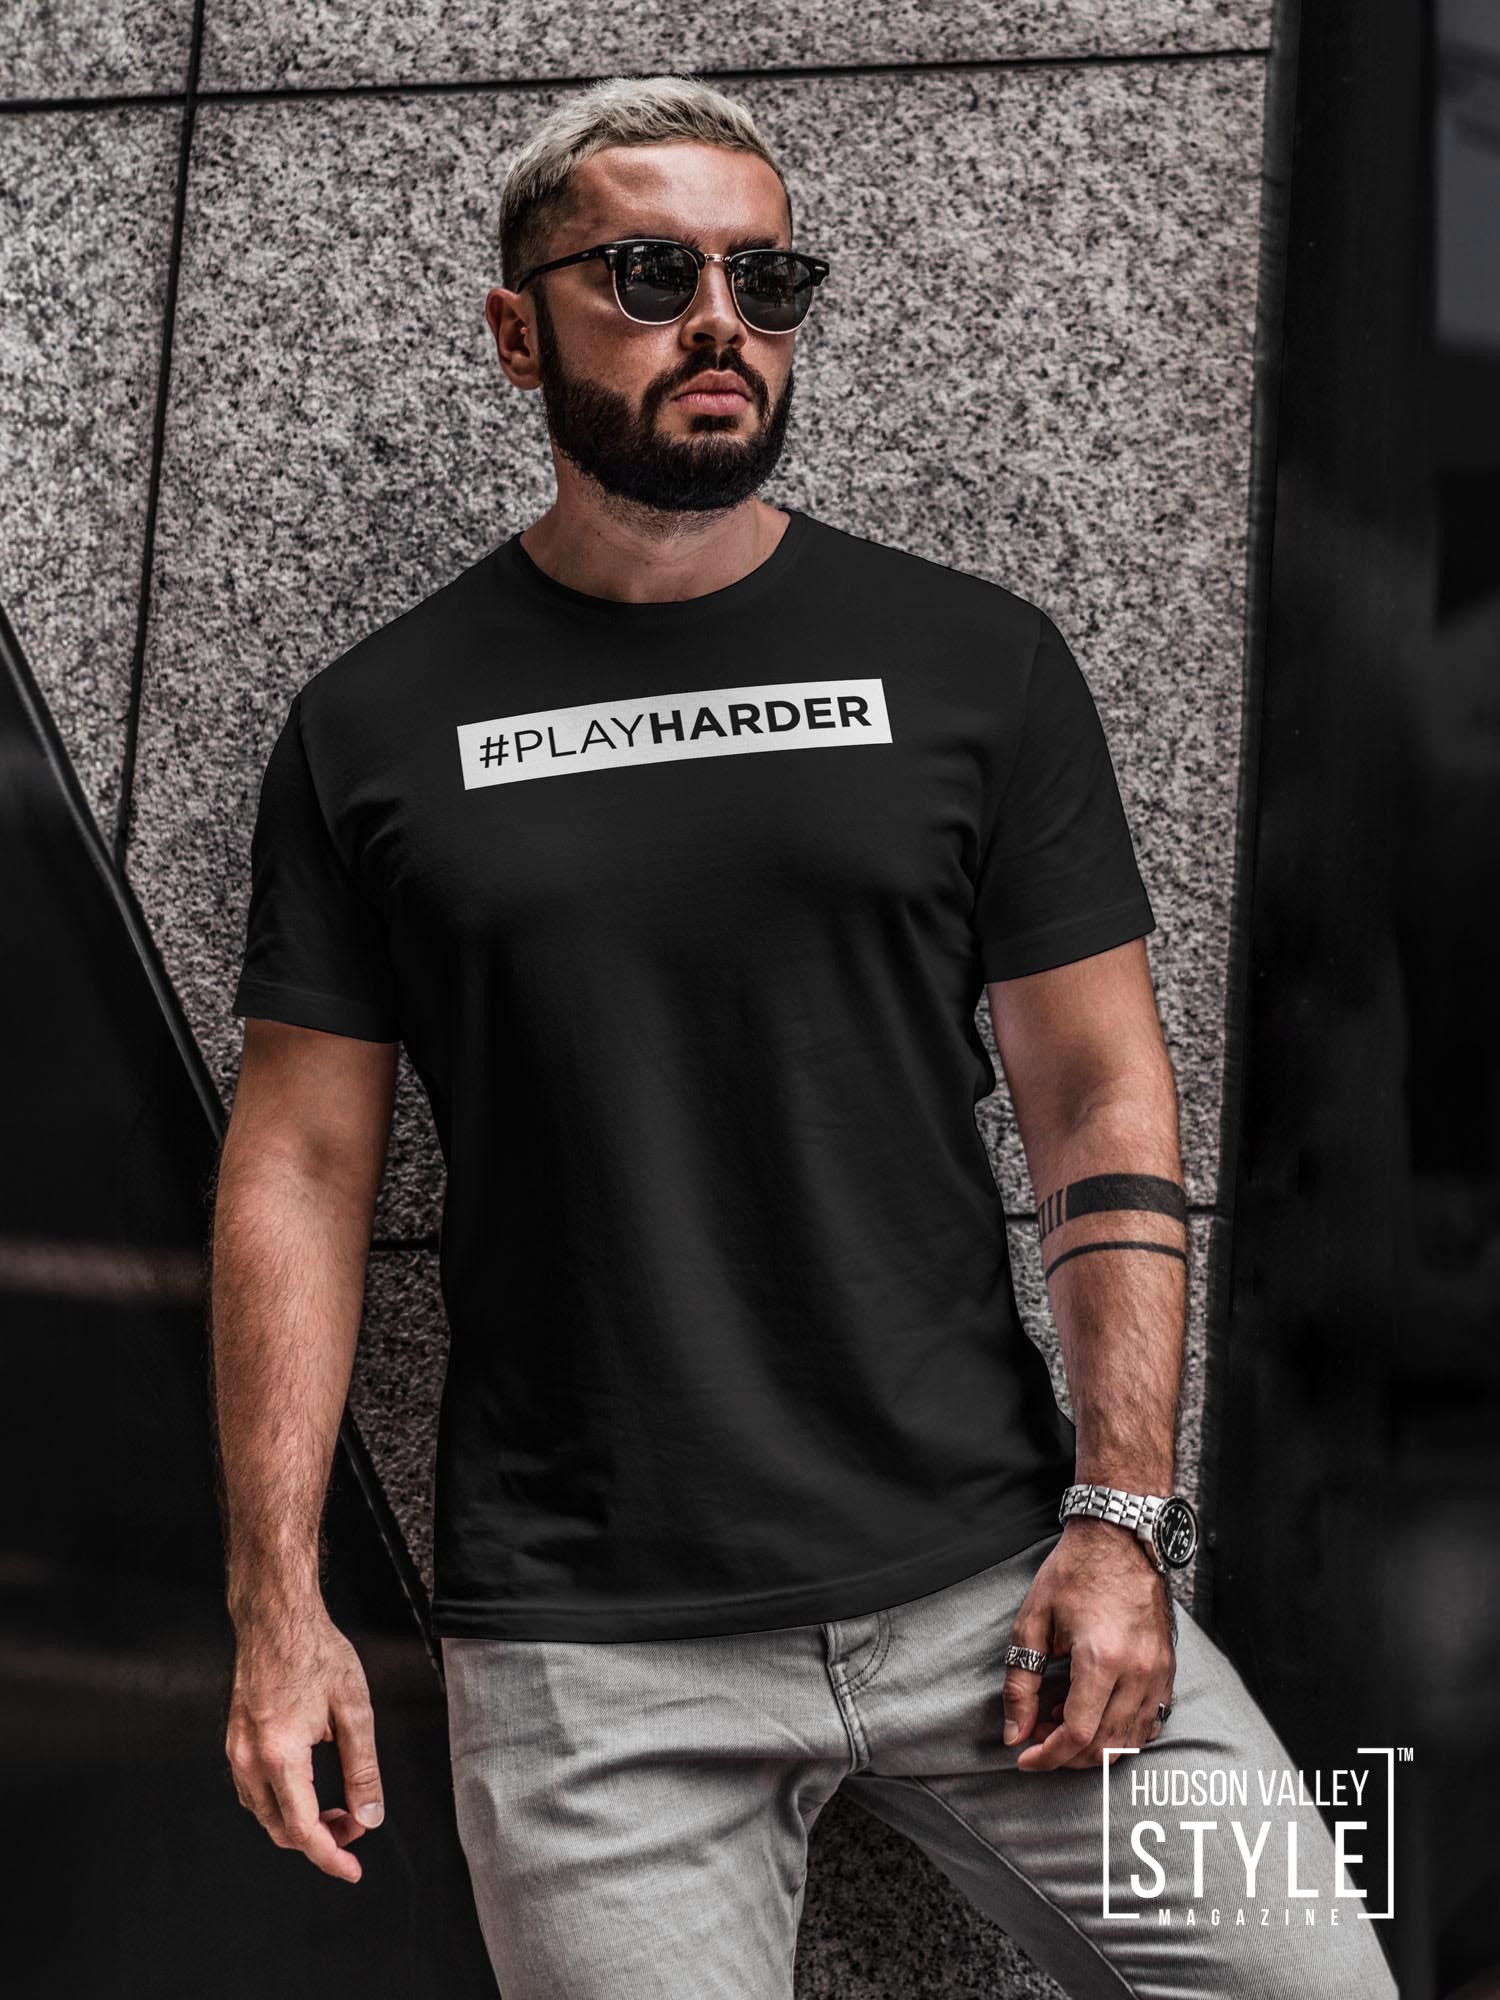 The New Generation of Fashion and Lifestyle Brands: A Closer Look at HARD NEW YORK – Presented by HARD NEW YORK – Fashion Accessories, Bodybuilding Supplements and Homoerotic Art